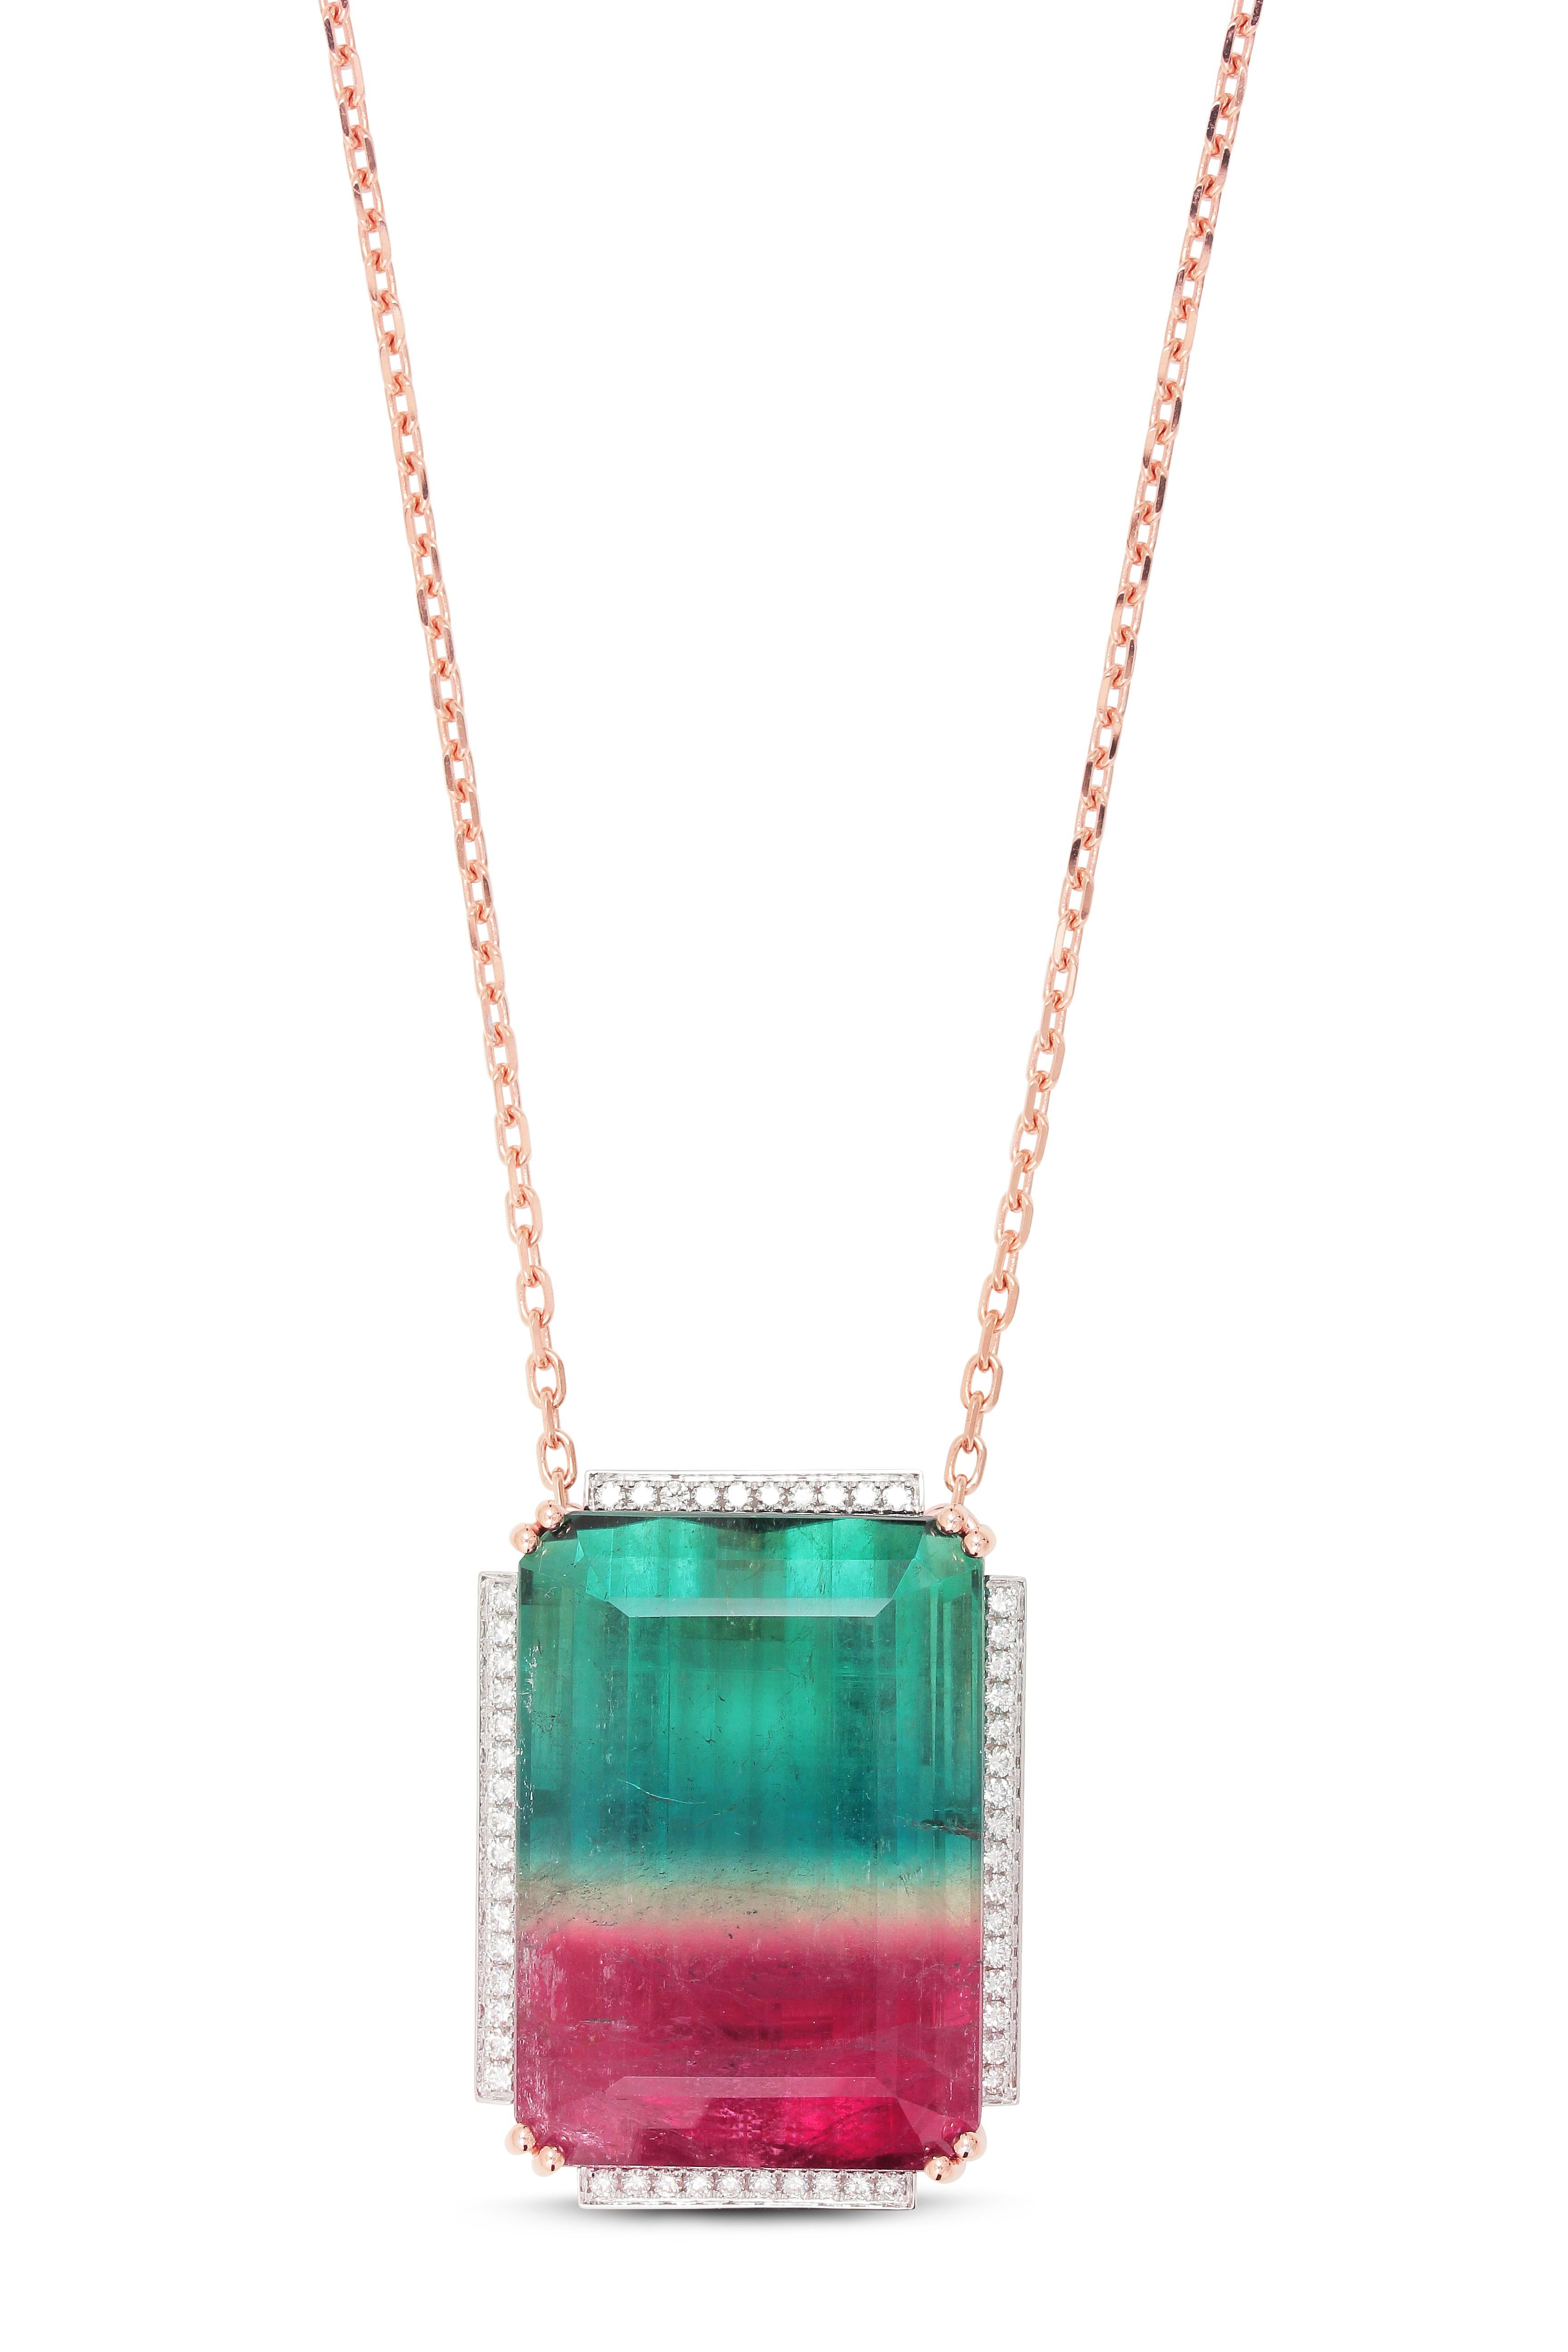 Frederic Sage 128.63 Carat Watermelon Tourmaline Diamond Necklace Pendant In New Condition For Sale In New York, NY